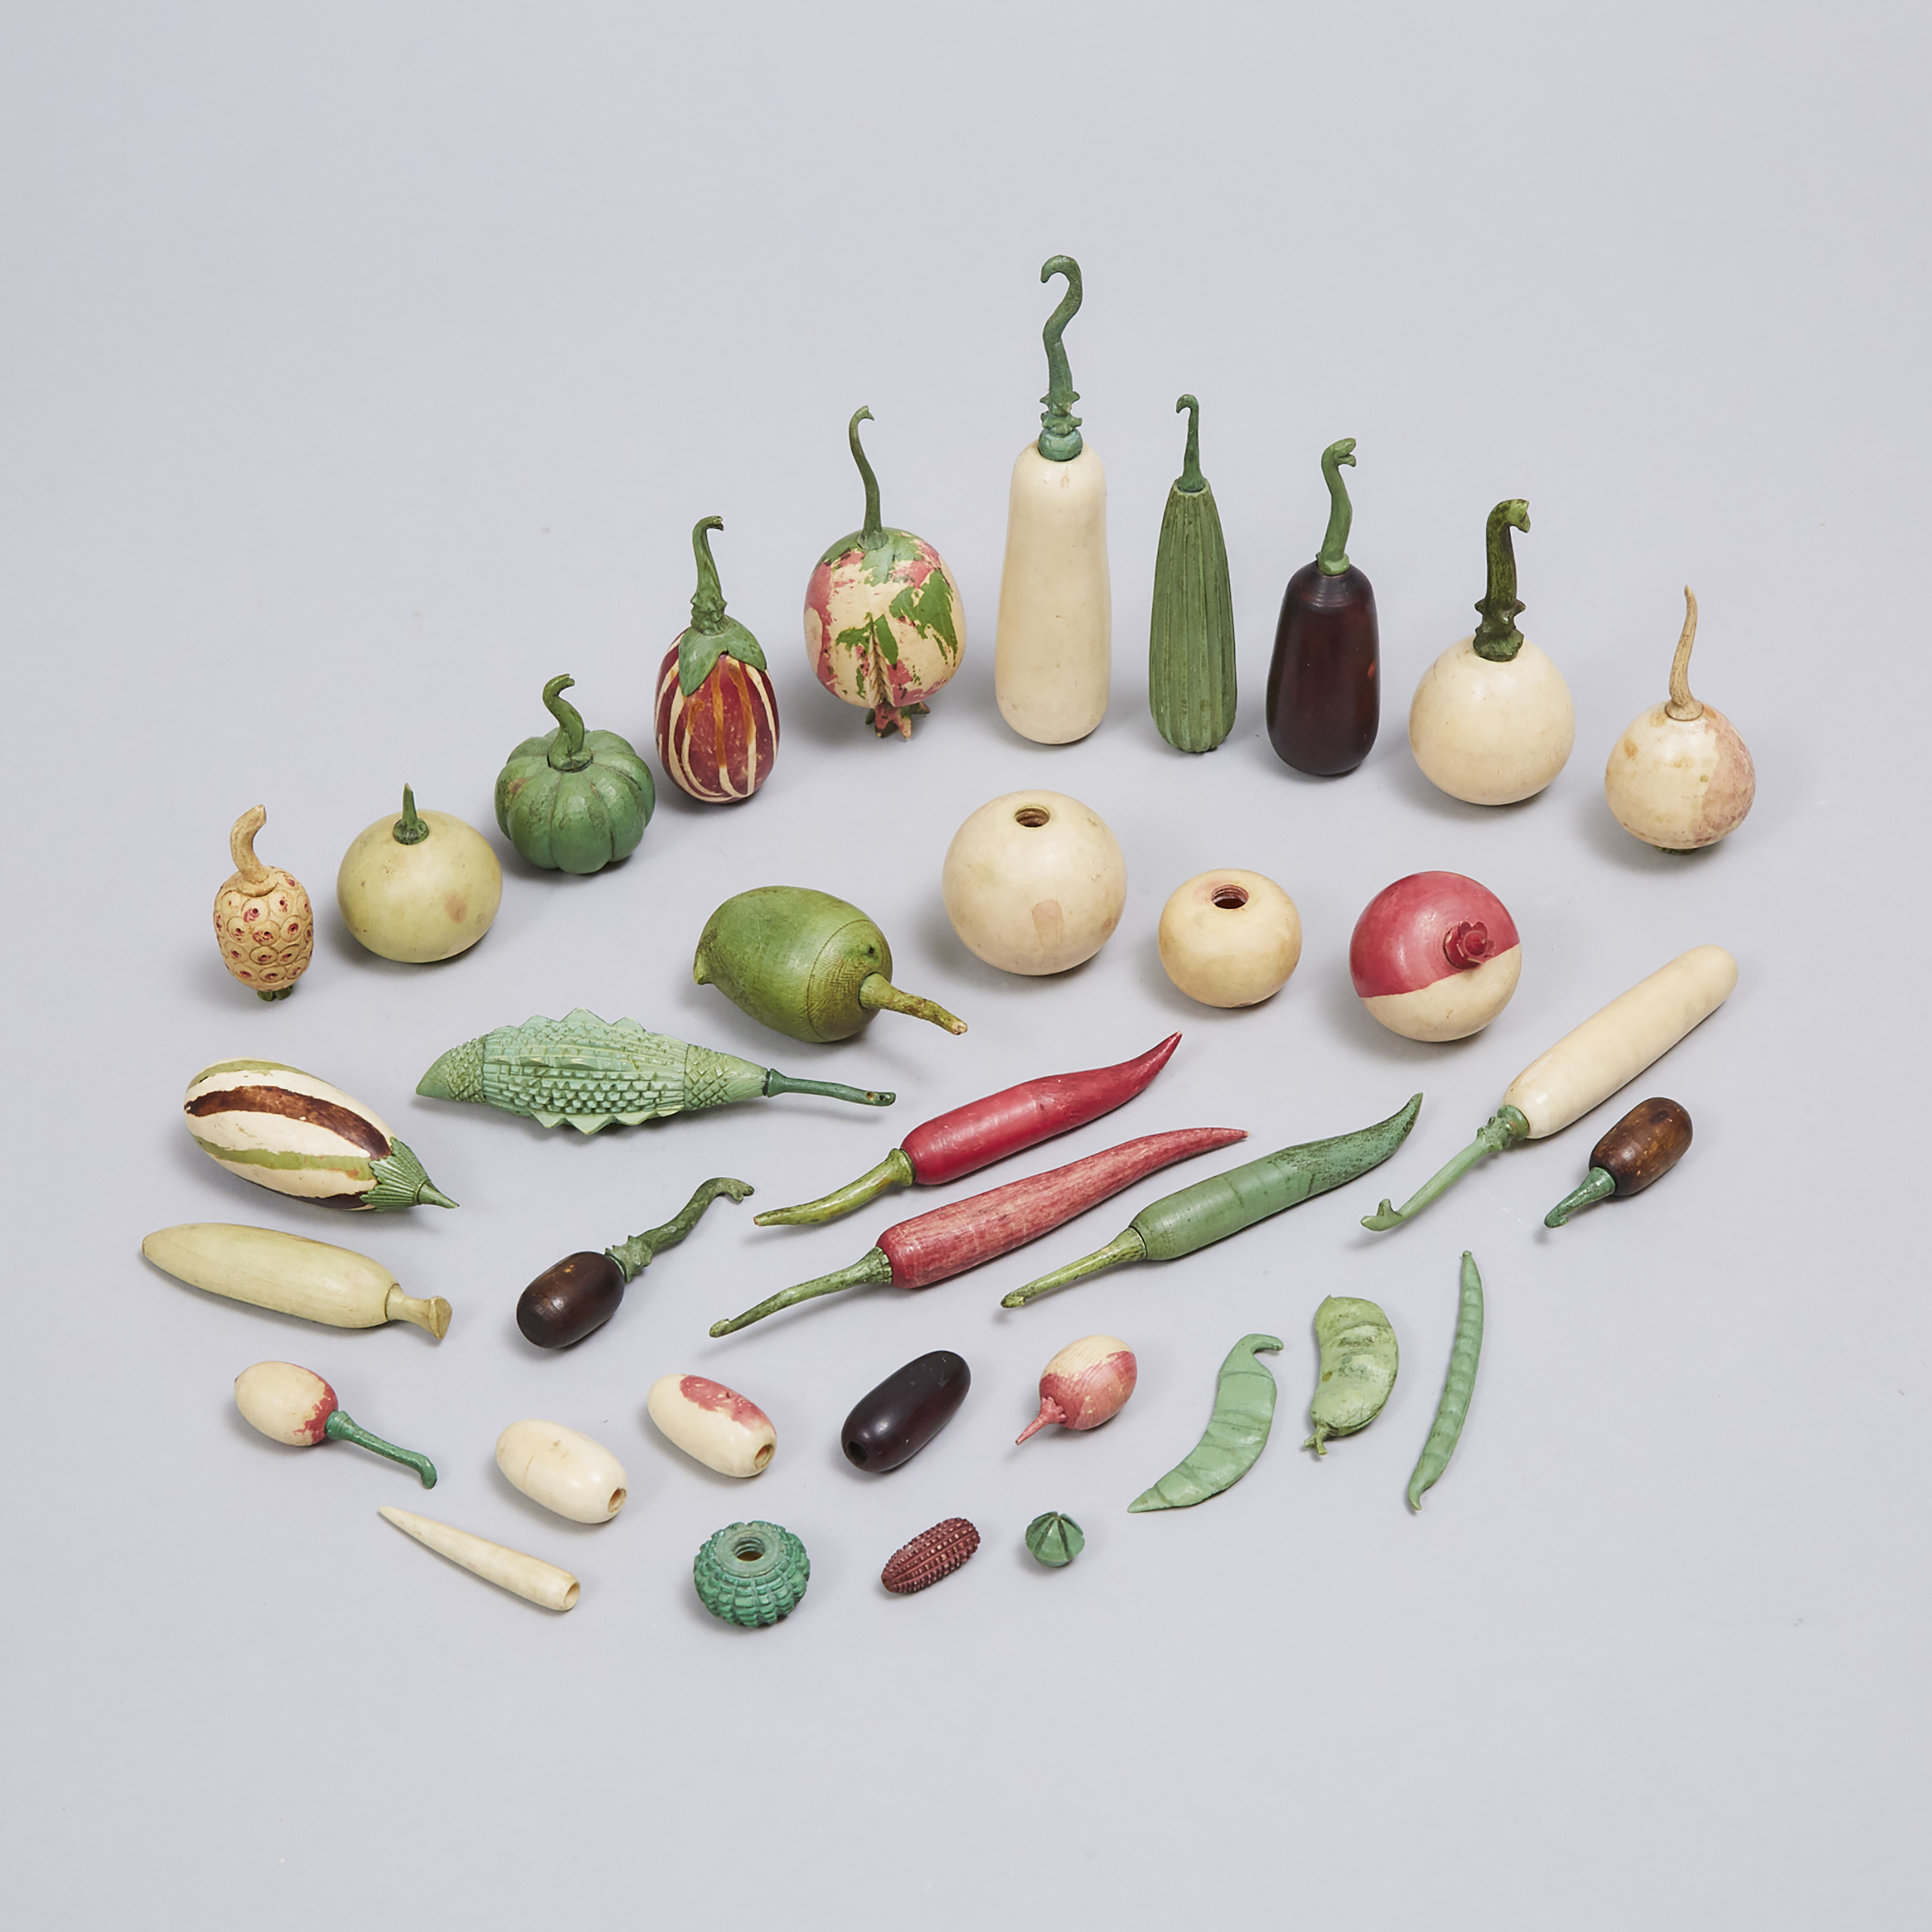 Collection of 32 Indian Carved and Stained Ivory Didactic Botanical Models of Fruit, Vegetables and Spice Nuts, 19th century